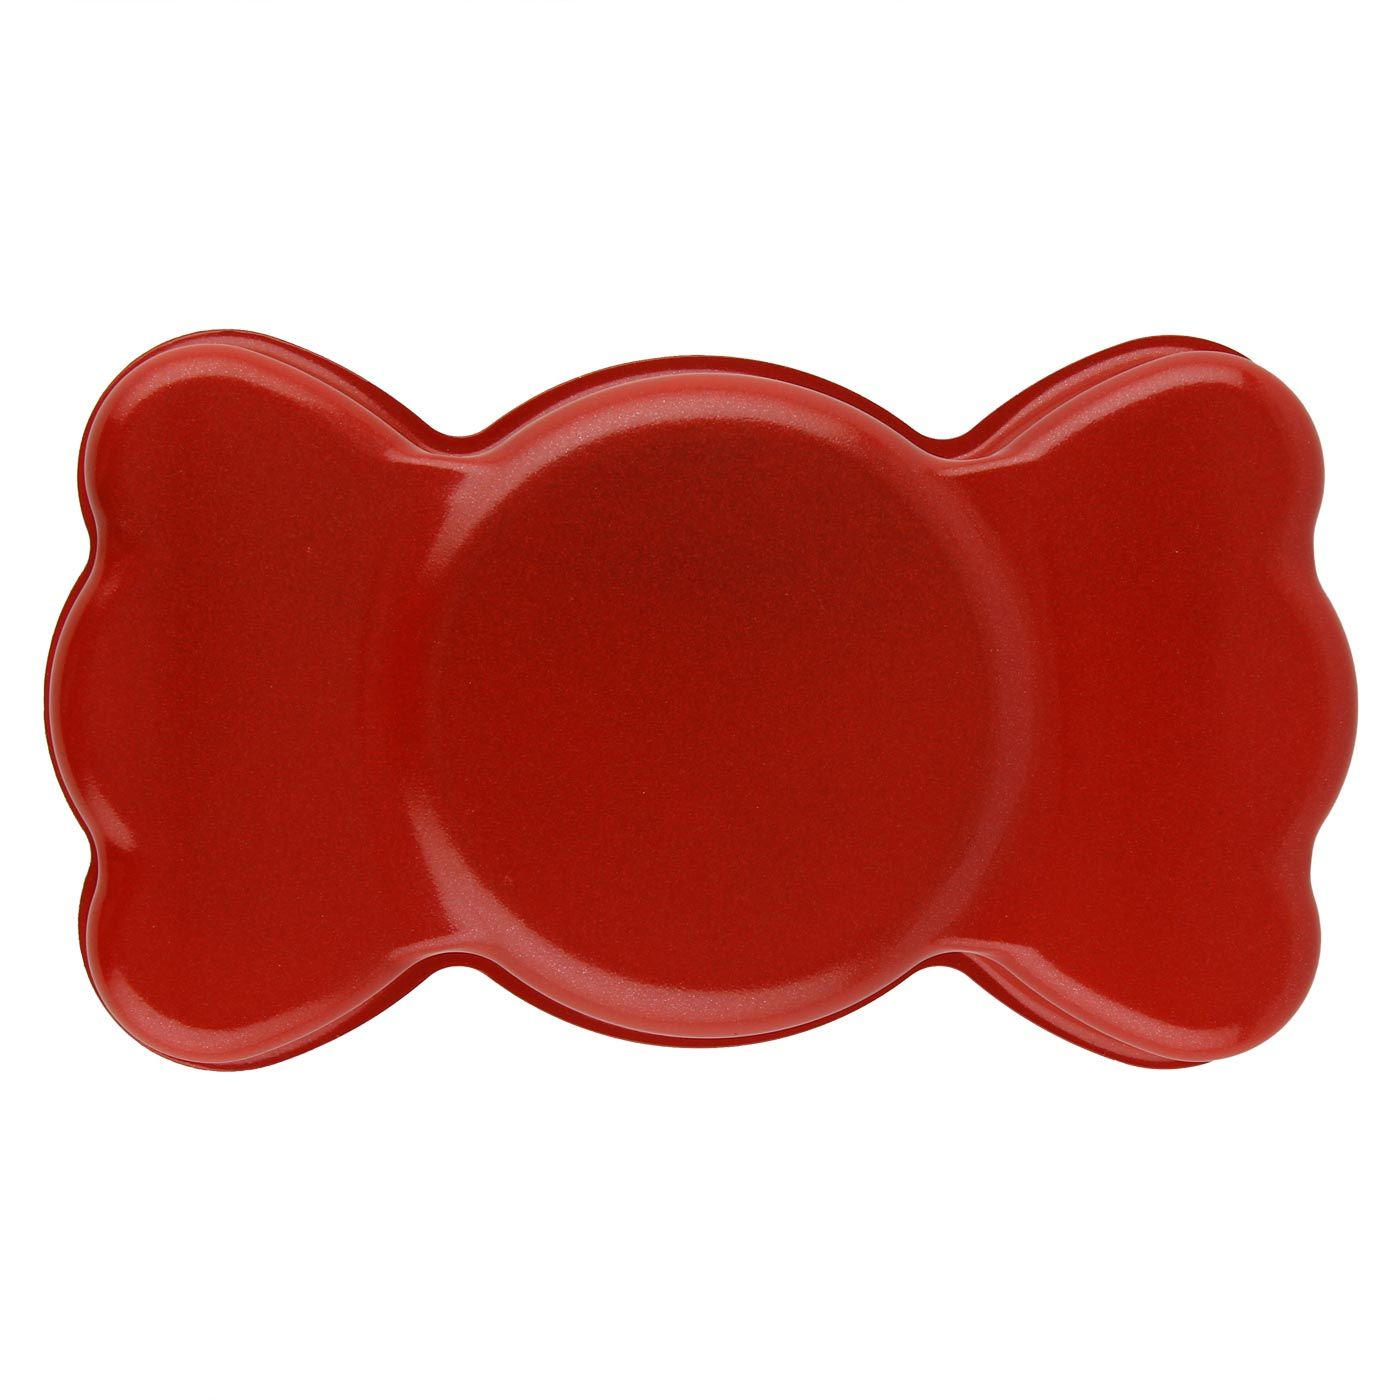 Delizioso Baking Tray Candy Bow - 1